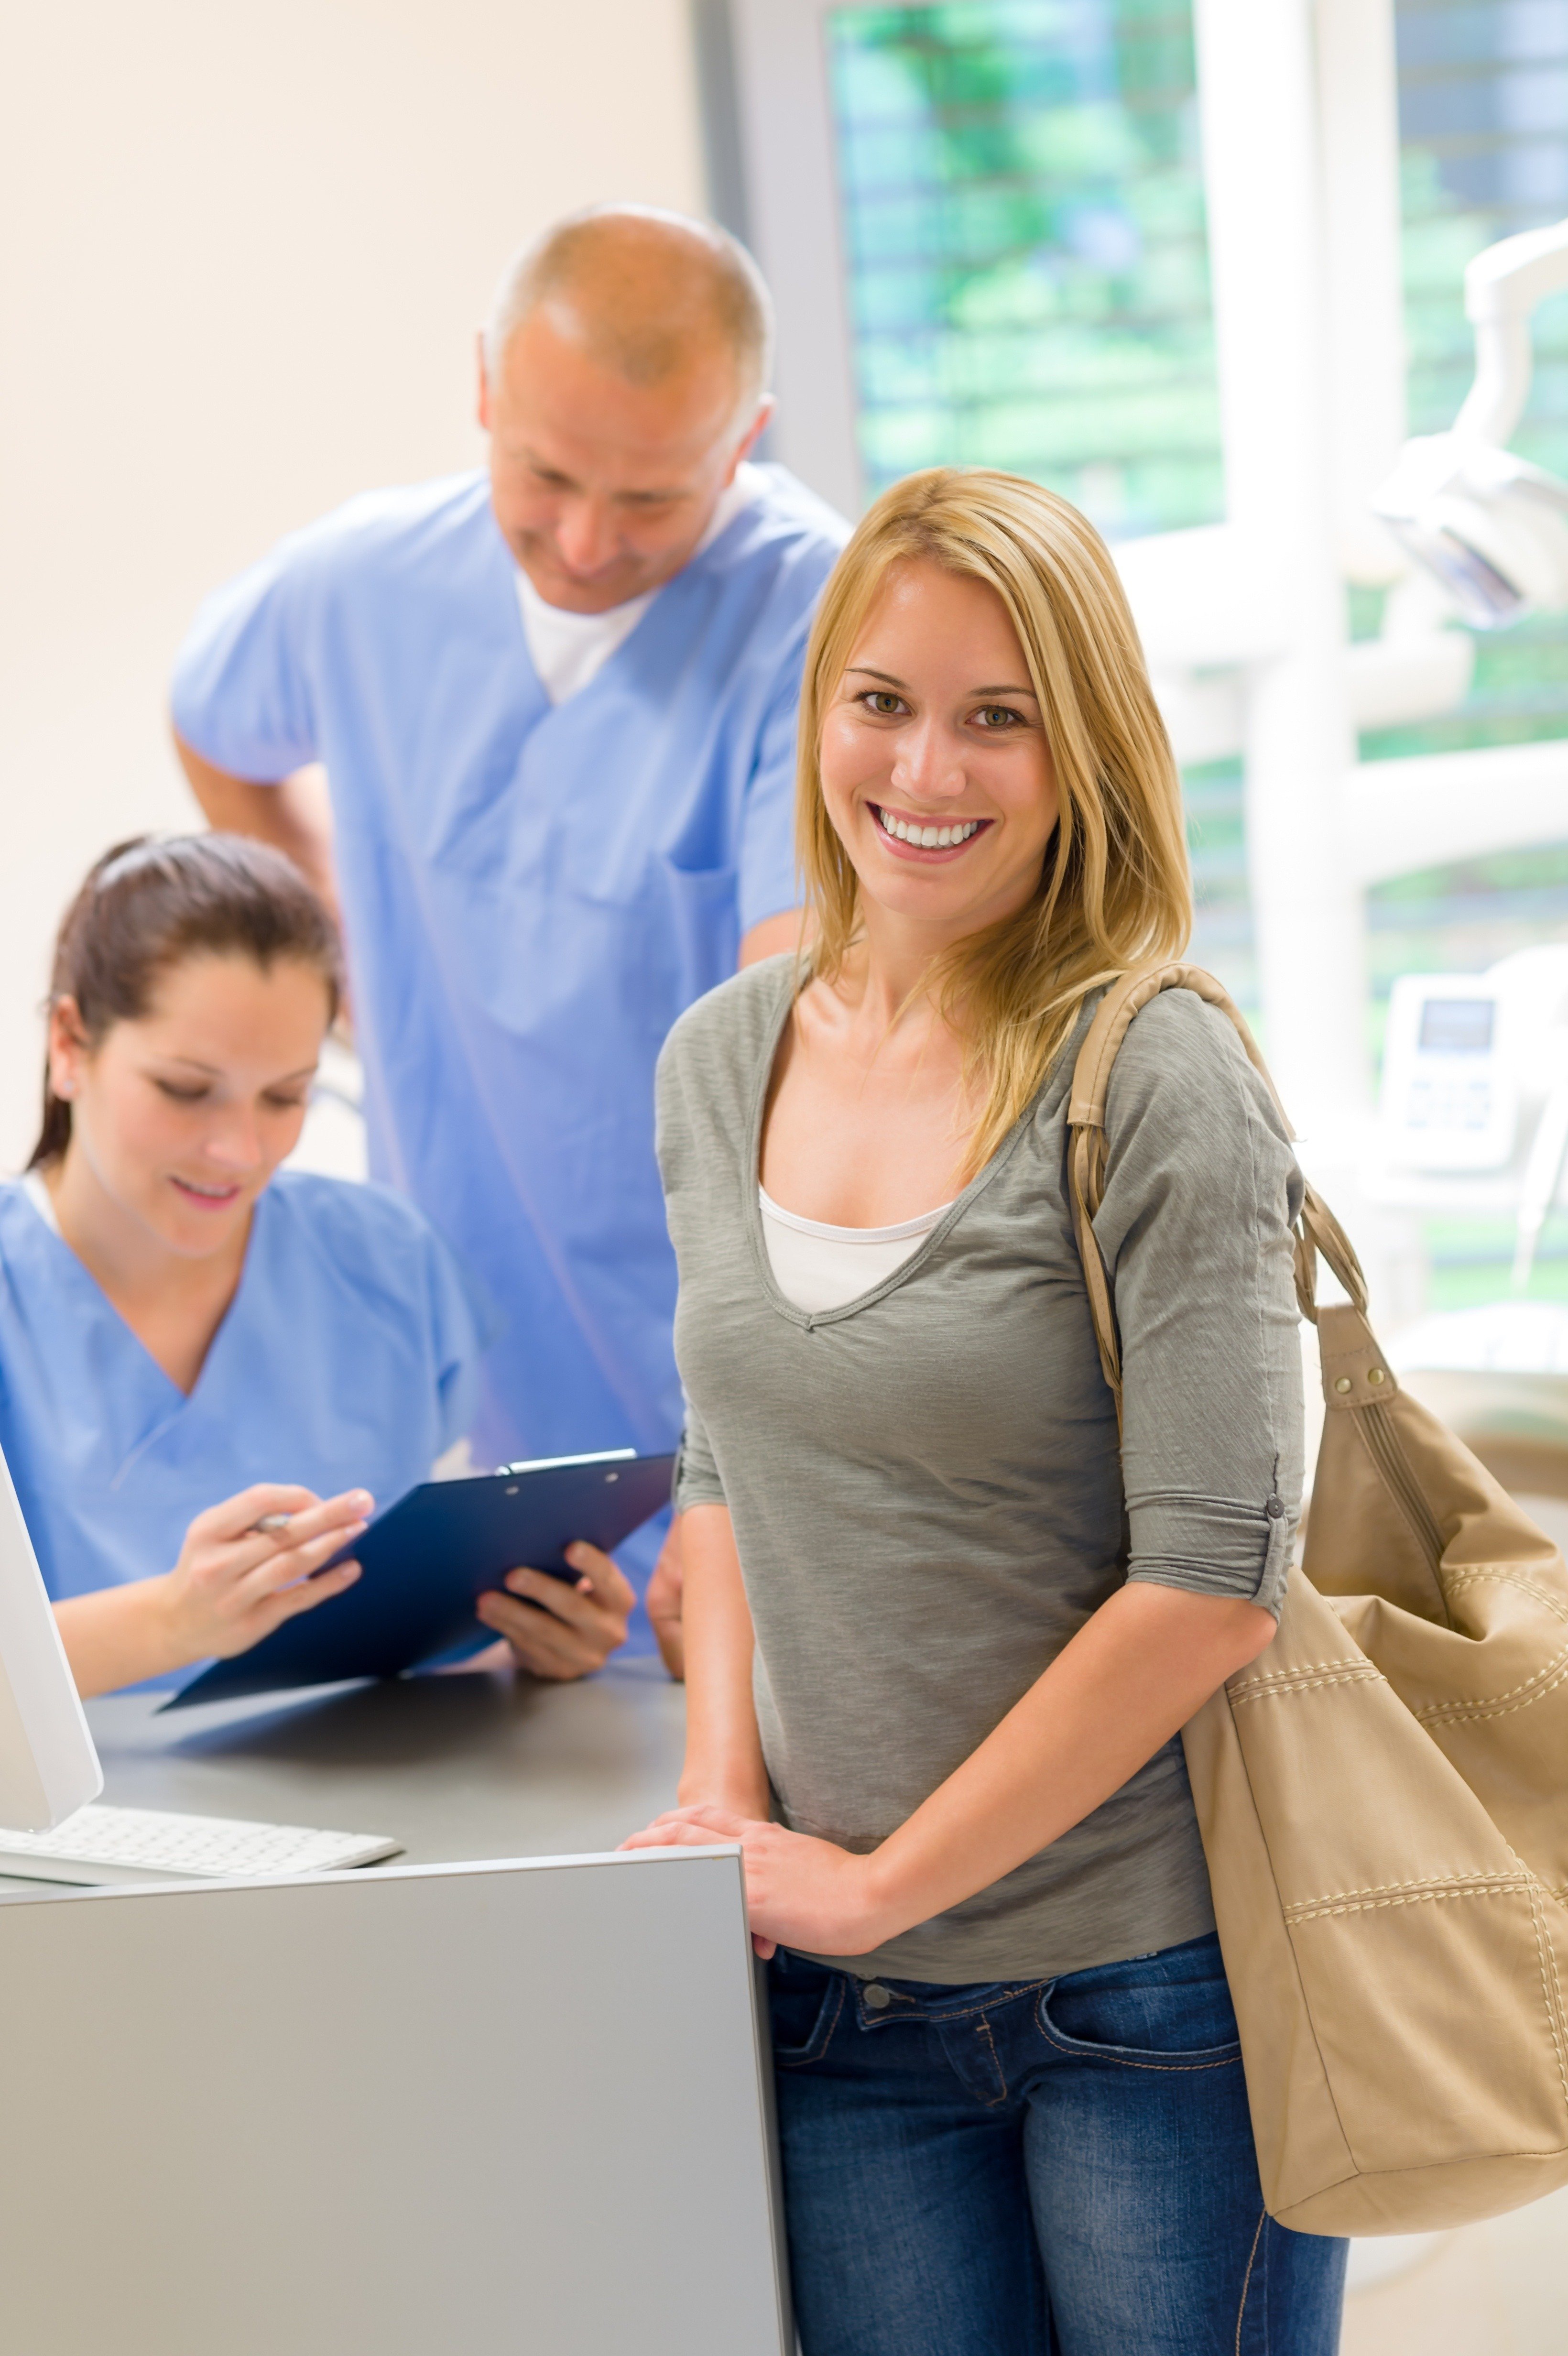 6 Reasons Why Inbound Marketing for Dentists in 2020 Is Important